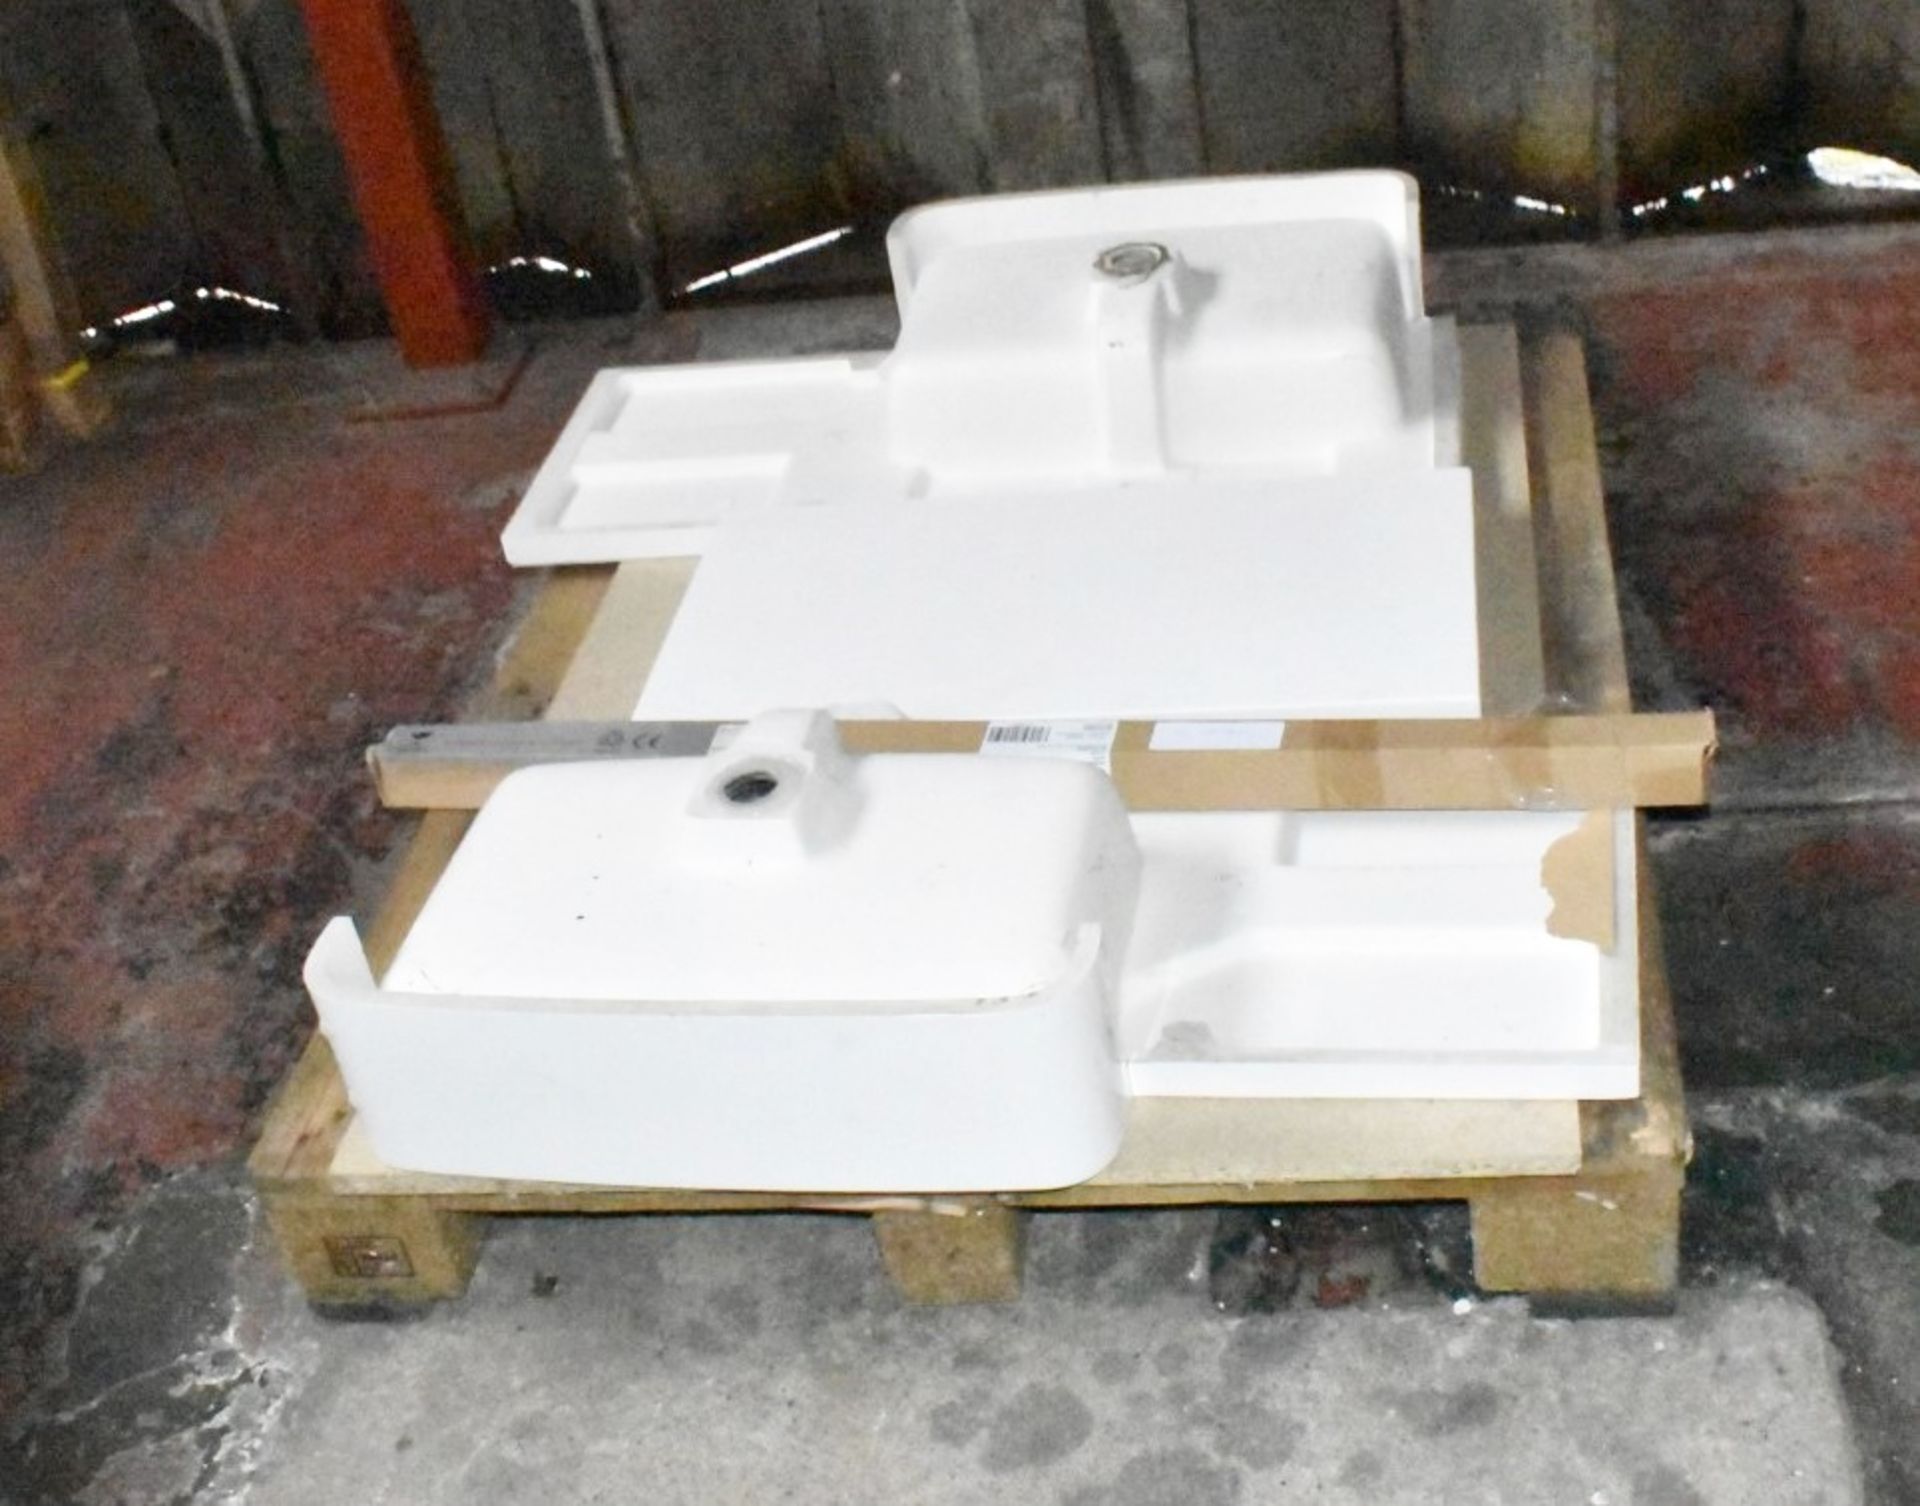 1 x Assorted Collection of Bathroom Stock - Shower Tray, Vanity Unit, Stone Sinks, Shower Panels - Image 8 of 17